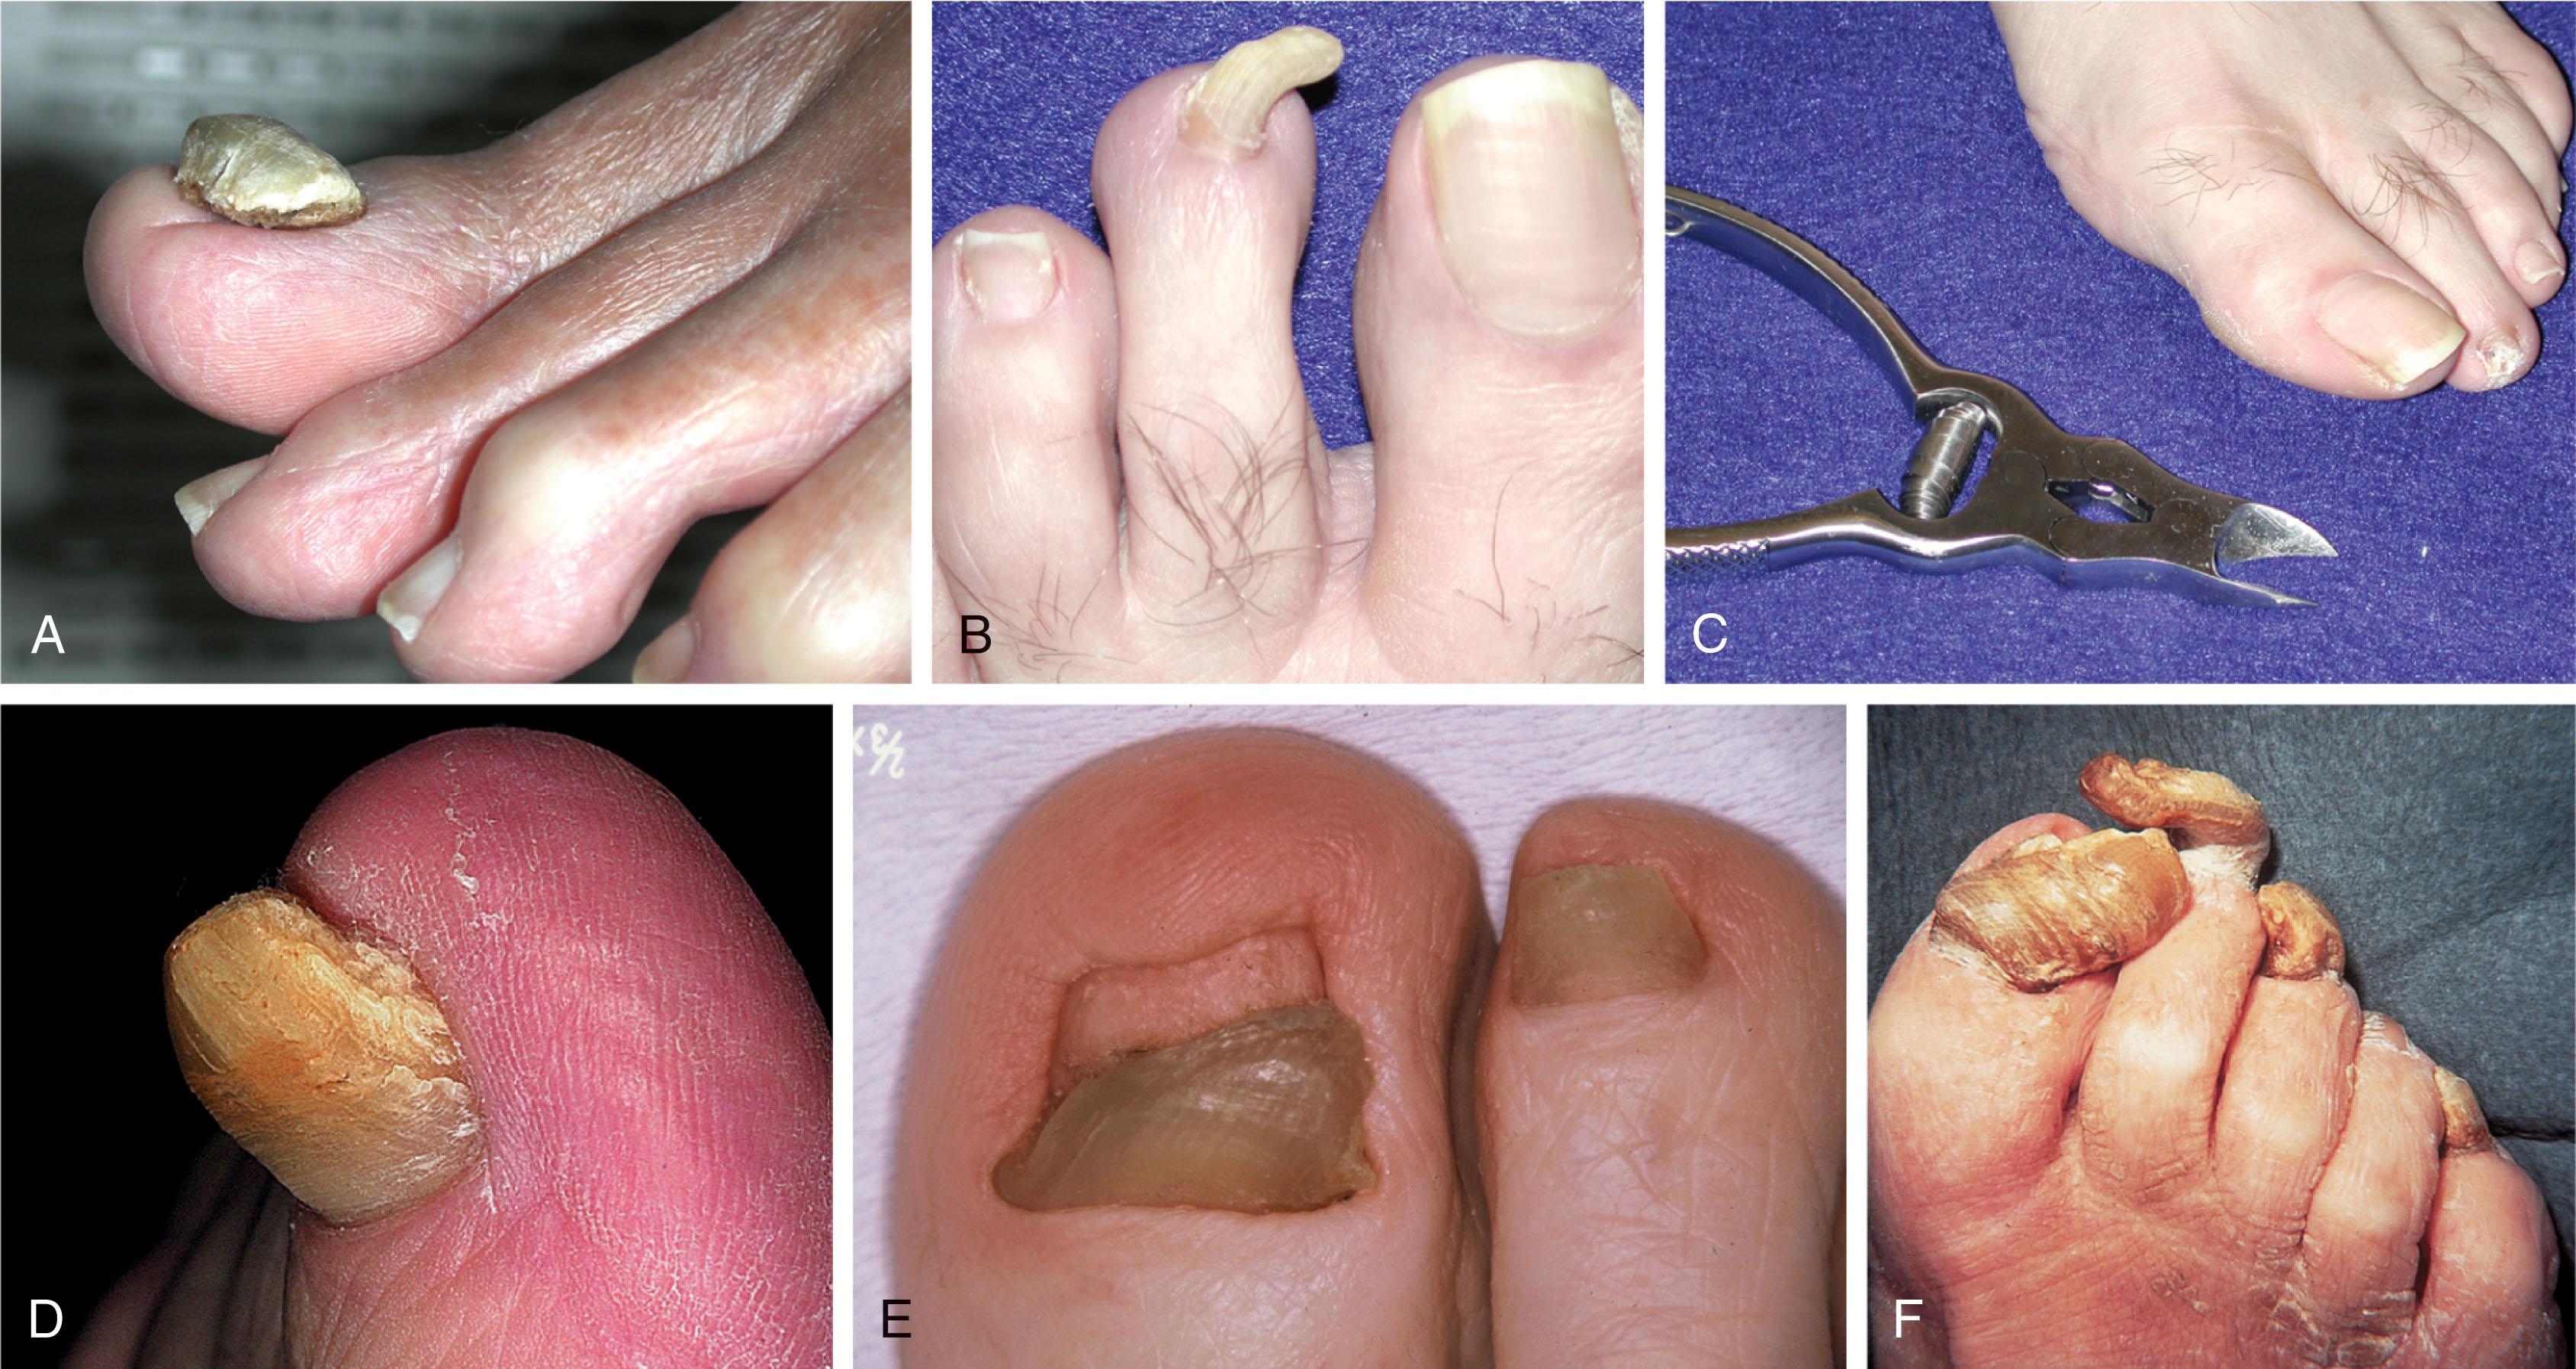 Fig. 14-29, Onychogryphosis. A and B , With onychogryphosis, nails may become grossly thickened. C , With the use of a special nail cutter, these nails can be trimmed in the office. D , Thickened and elevated nail. E , Congenital deformity of the great toenail. F , Ram’s horn toenail deformity from chronic infection and lack of proper care.